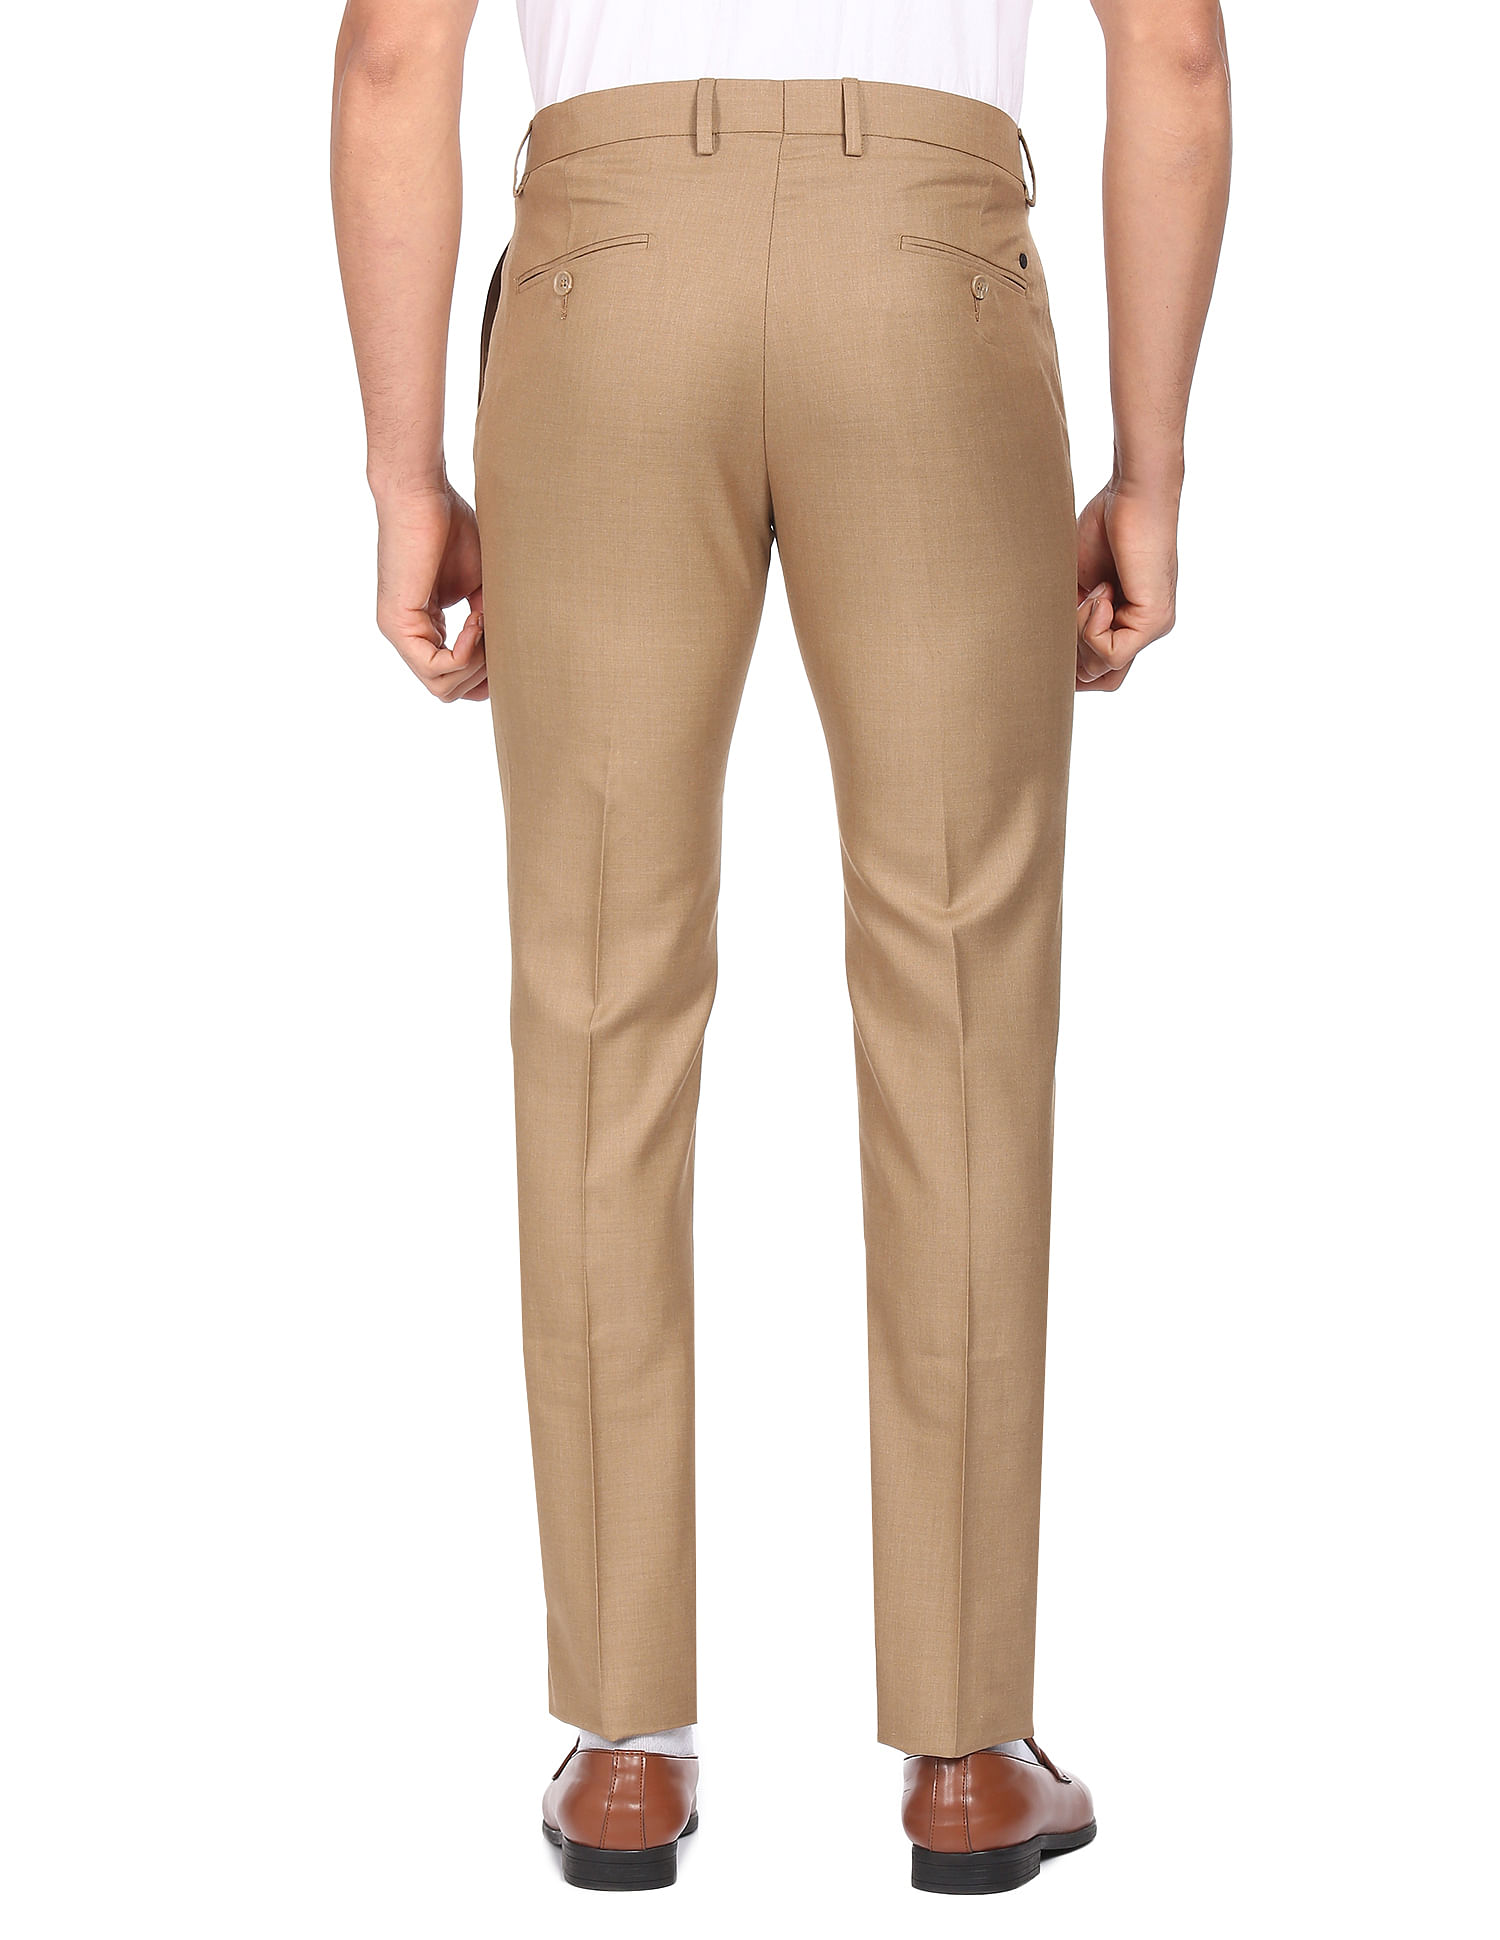 Buy ARROW Solid Polyester Blend Regular Fit Mens Trousers | Shoppers Stop